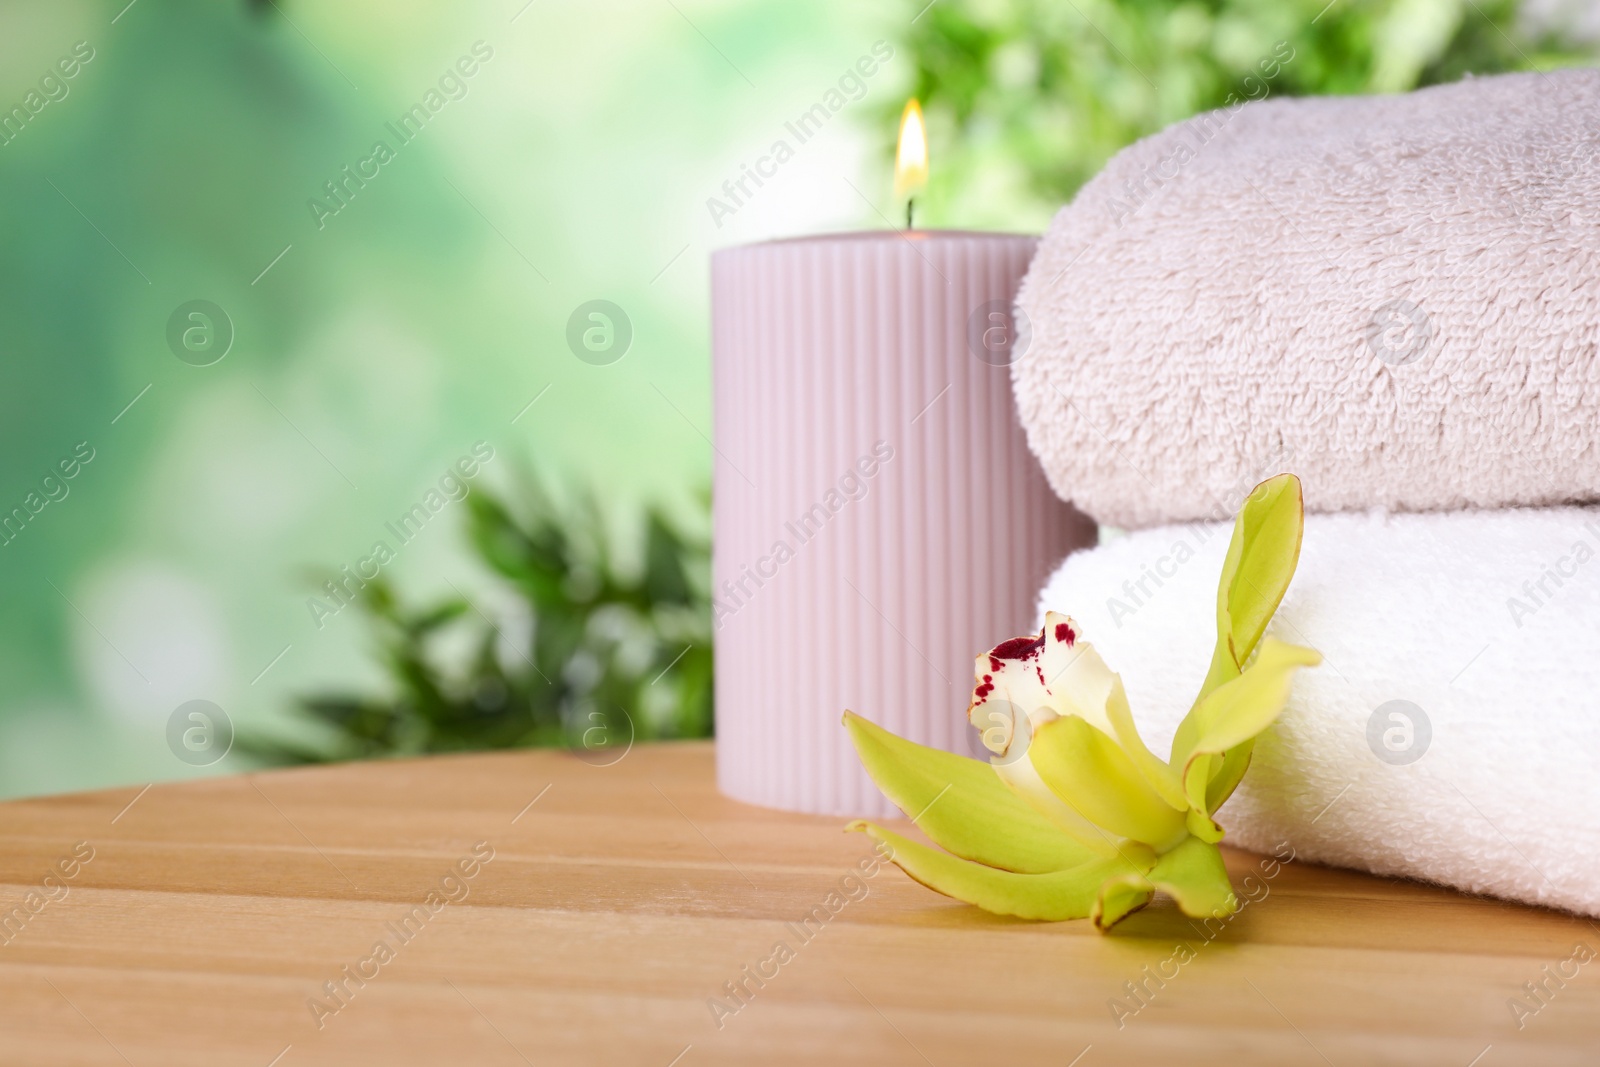 Photo of Exotic flower, burning candle and fresh towels on wooden table against blurred green background, space for text